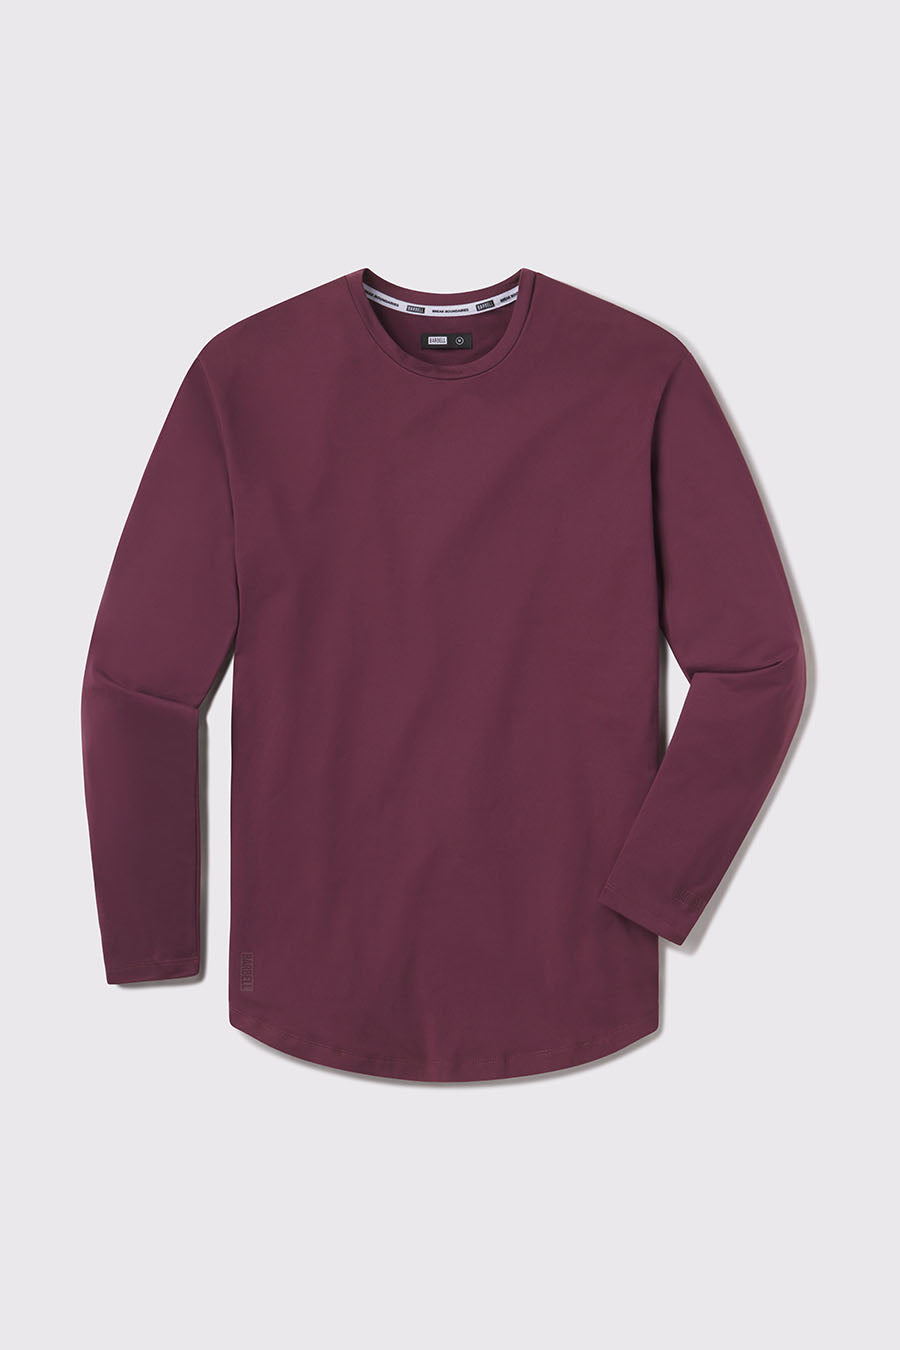 Havok Long Sleeve - Currant - photo from front flat lay #color_currant